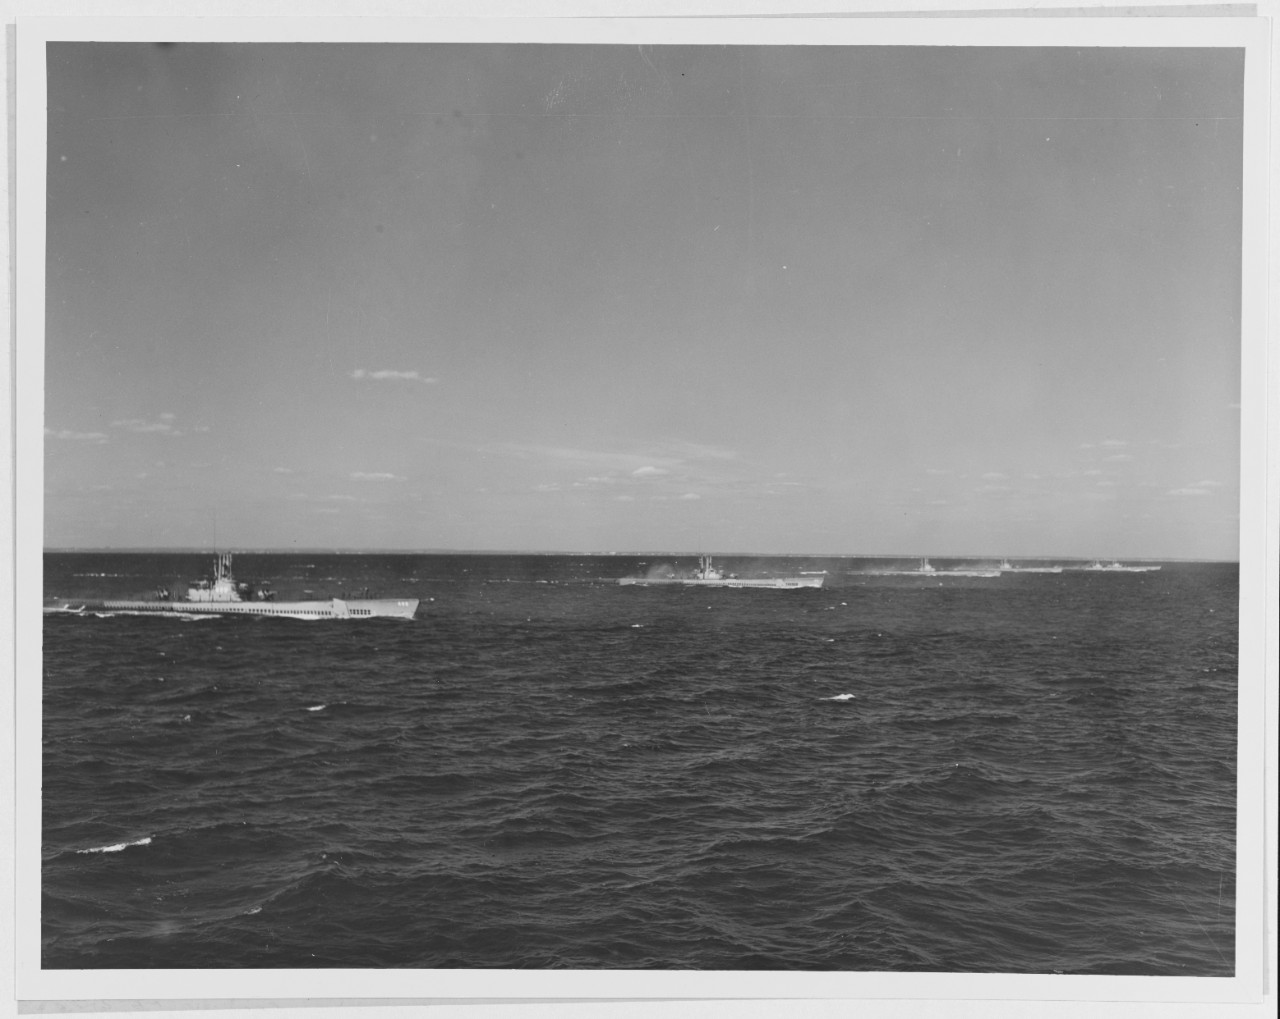 USS SARDA (SS-488), USS TORSK (SS-423), and other submarines